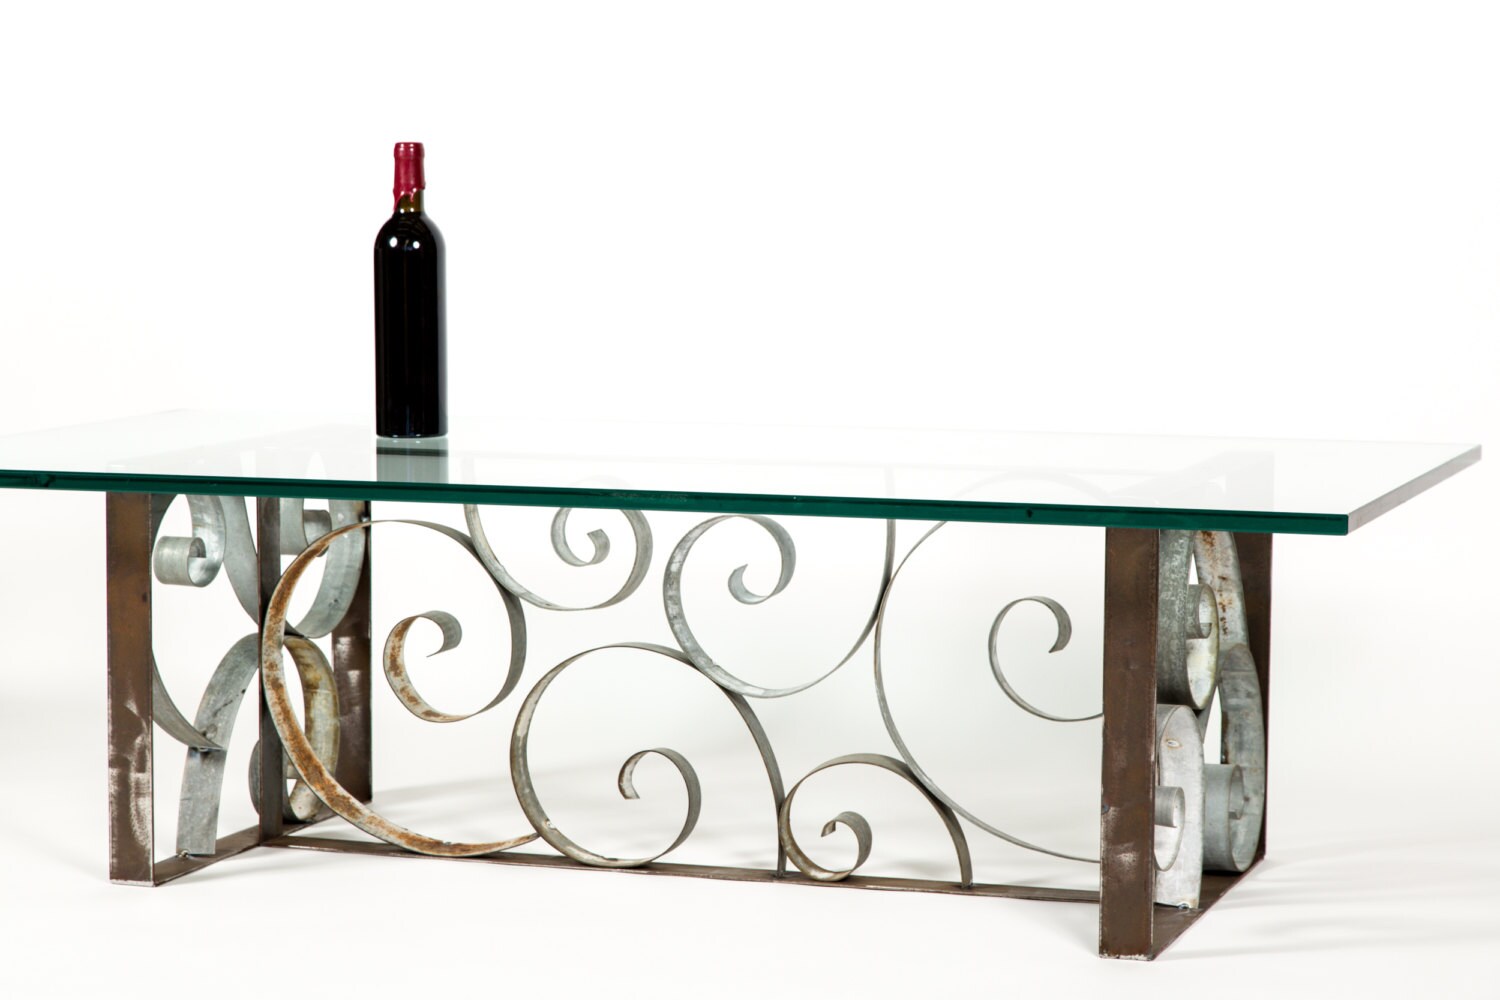 Wine Barrel Ring Coffee Table - Raiment V3 - made from retired wine barrel rings 100% Recycled!